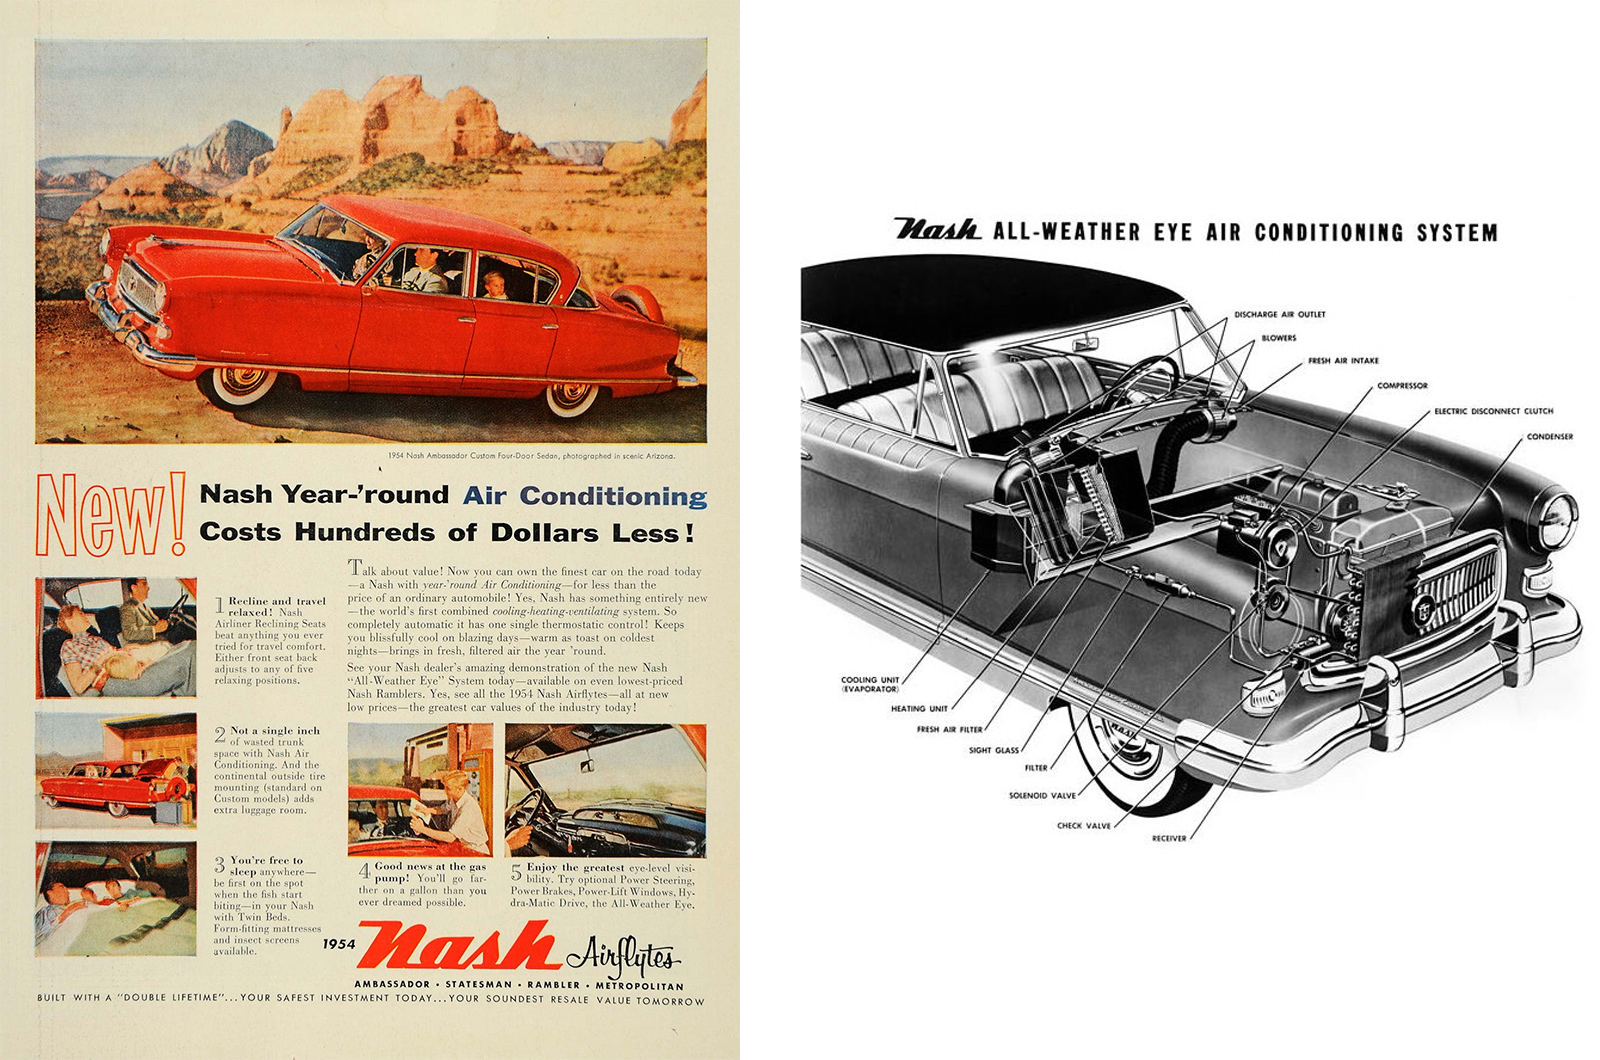 <p>As mentioned, Packard offered air conditioning on its cars in 1940-42, but the system was very costly and grossly inefficient; it also took up the entire boot space. Chrysler’s AirTemp system of 1953 was better, but again was imperfect, while various GM vehicles launched in late 1953 had a large <strong>Frigidaire</strong>-based system using boot-based equipment.</p><p>Nash overcame such hurdles aided by its sister company, refrigerator manufacturer <strong>Kelvinator</strong>. Using that firm's know-how Nash was first to offer an affordable and practical fully integrated <strong>heating, ventilation and air conditioning </strong>(HVAC) system from the 1954 model year, in its Ambassador. The rest of the industry swiftly followed suit with this very important advance.</p><p><strong>GROUNDBREAKER SCORE: </strong>9 – one we can all be grateful for.</p>